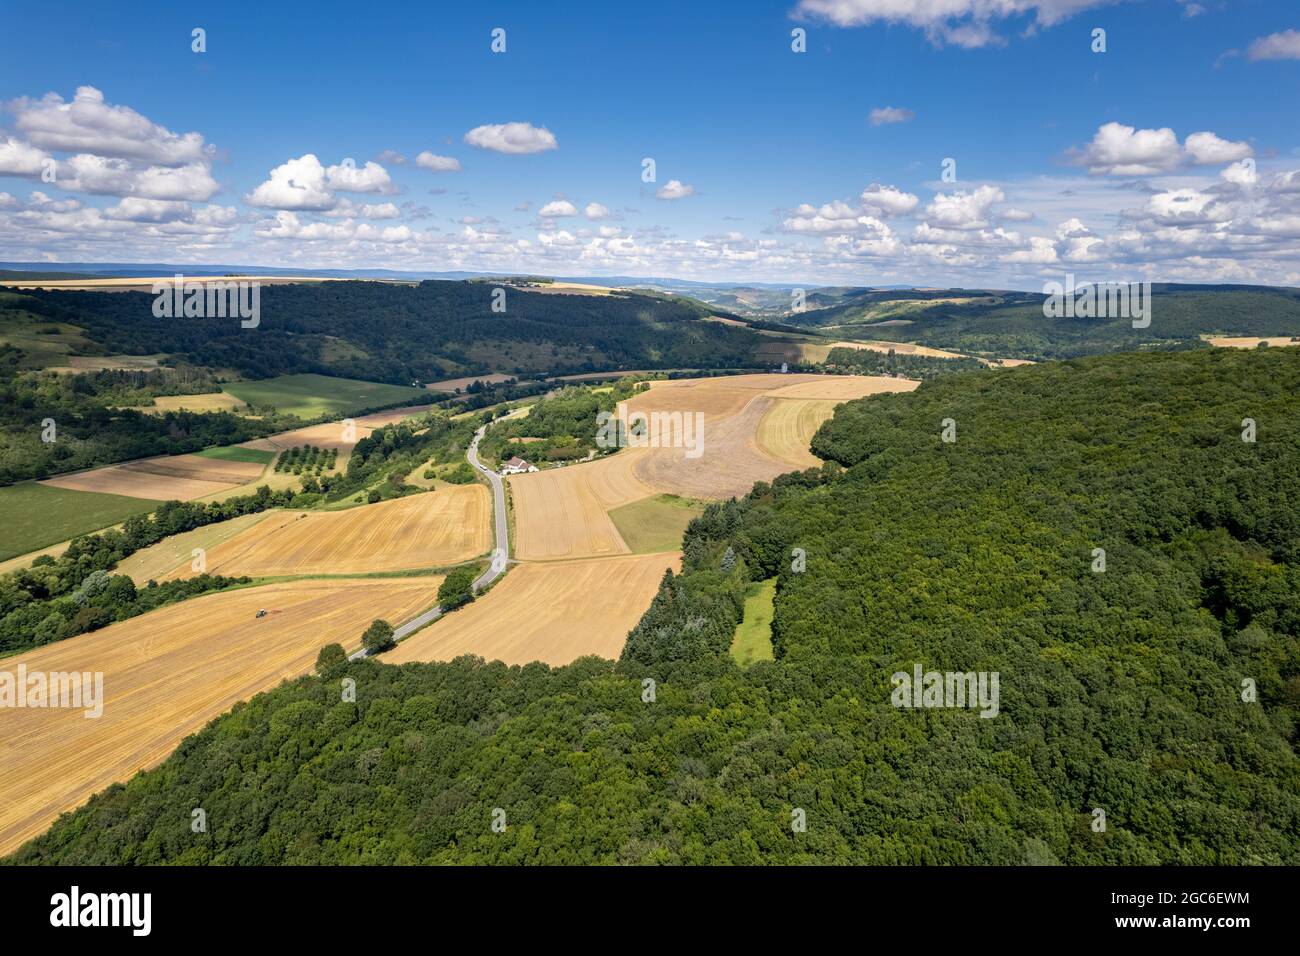 Aerial view of a landscape in Rhineland-Palatinate, Germany on the river Glan Stock Photo